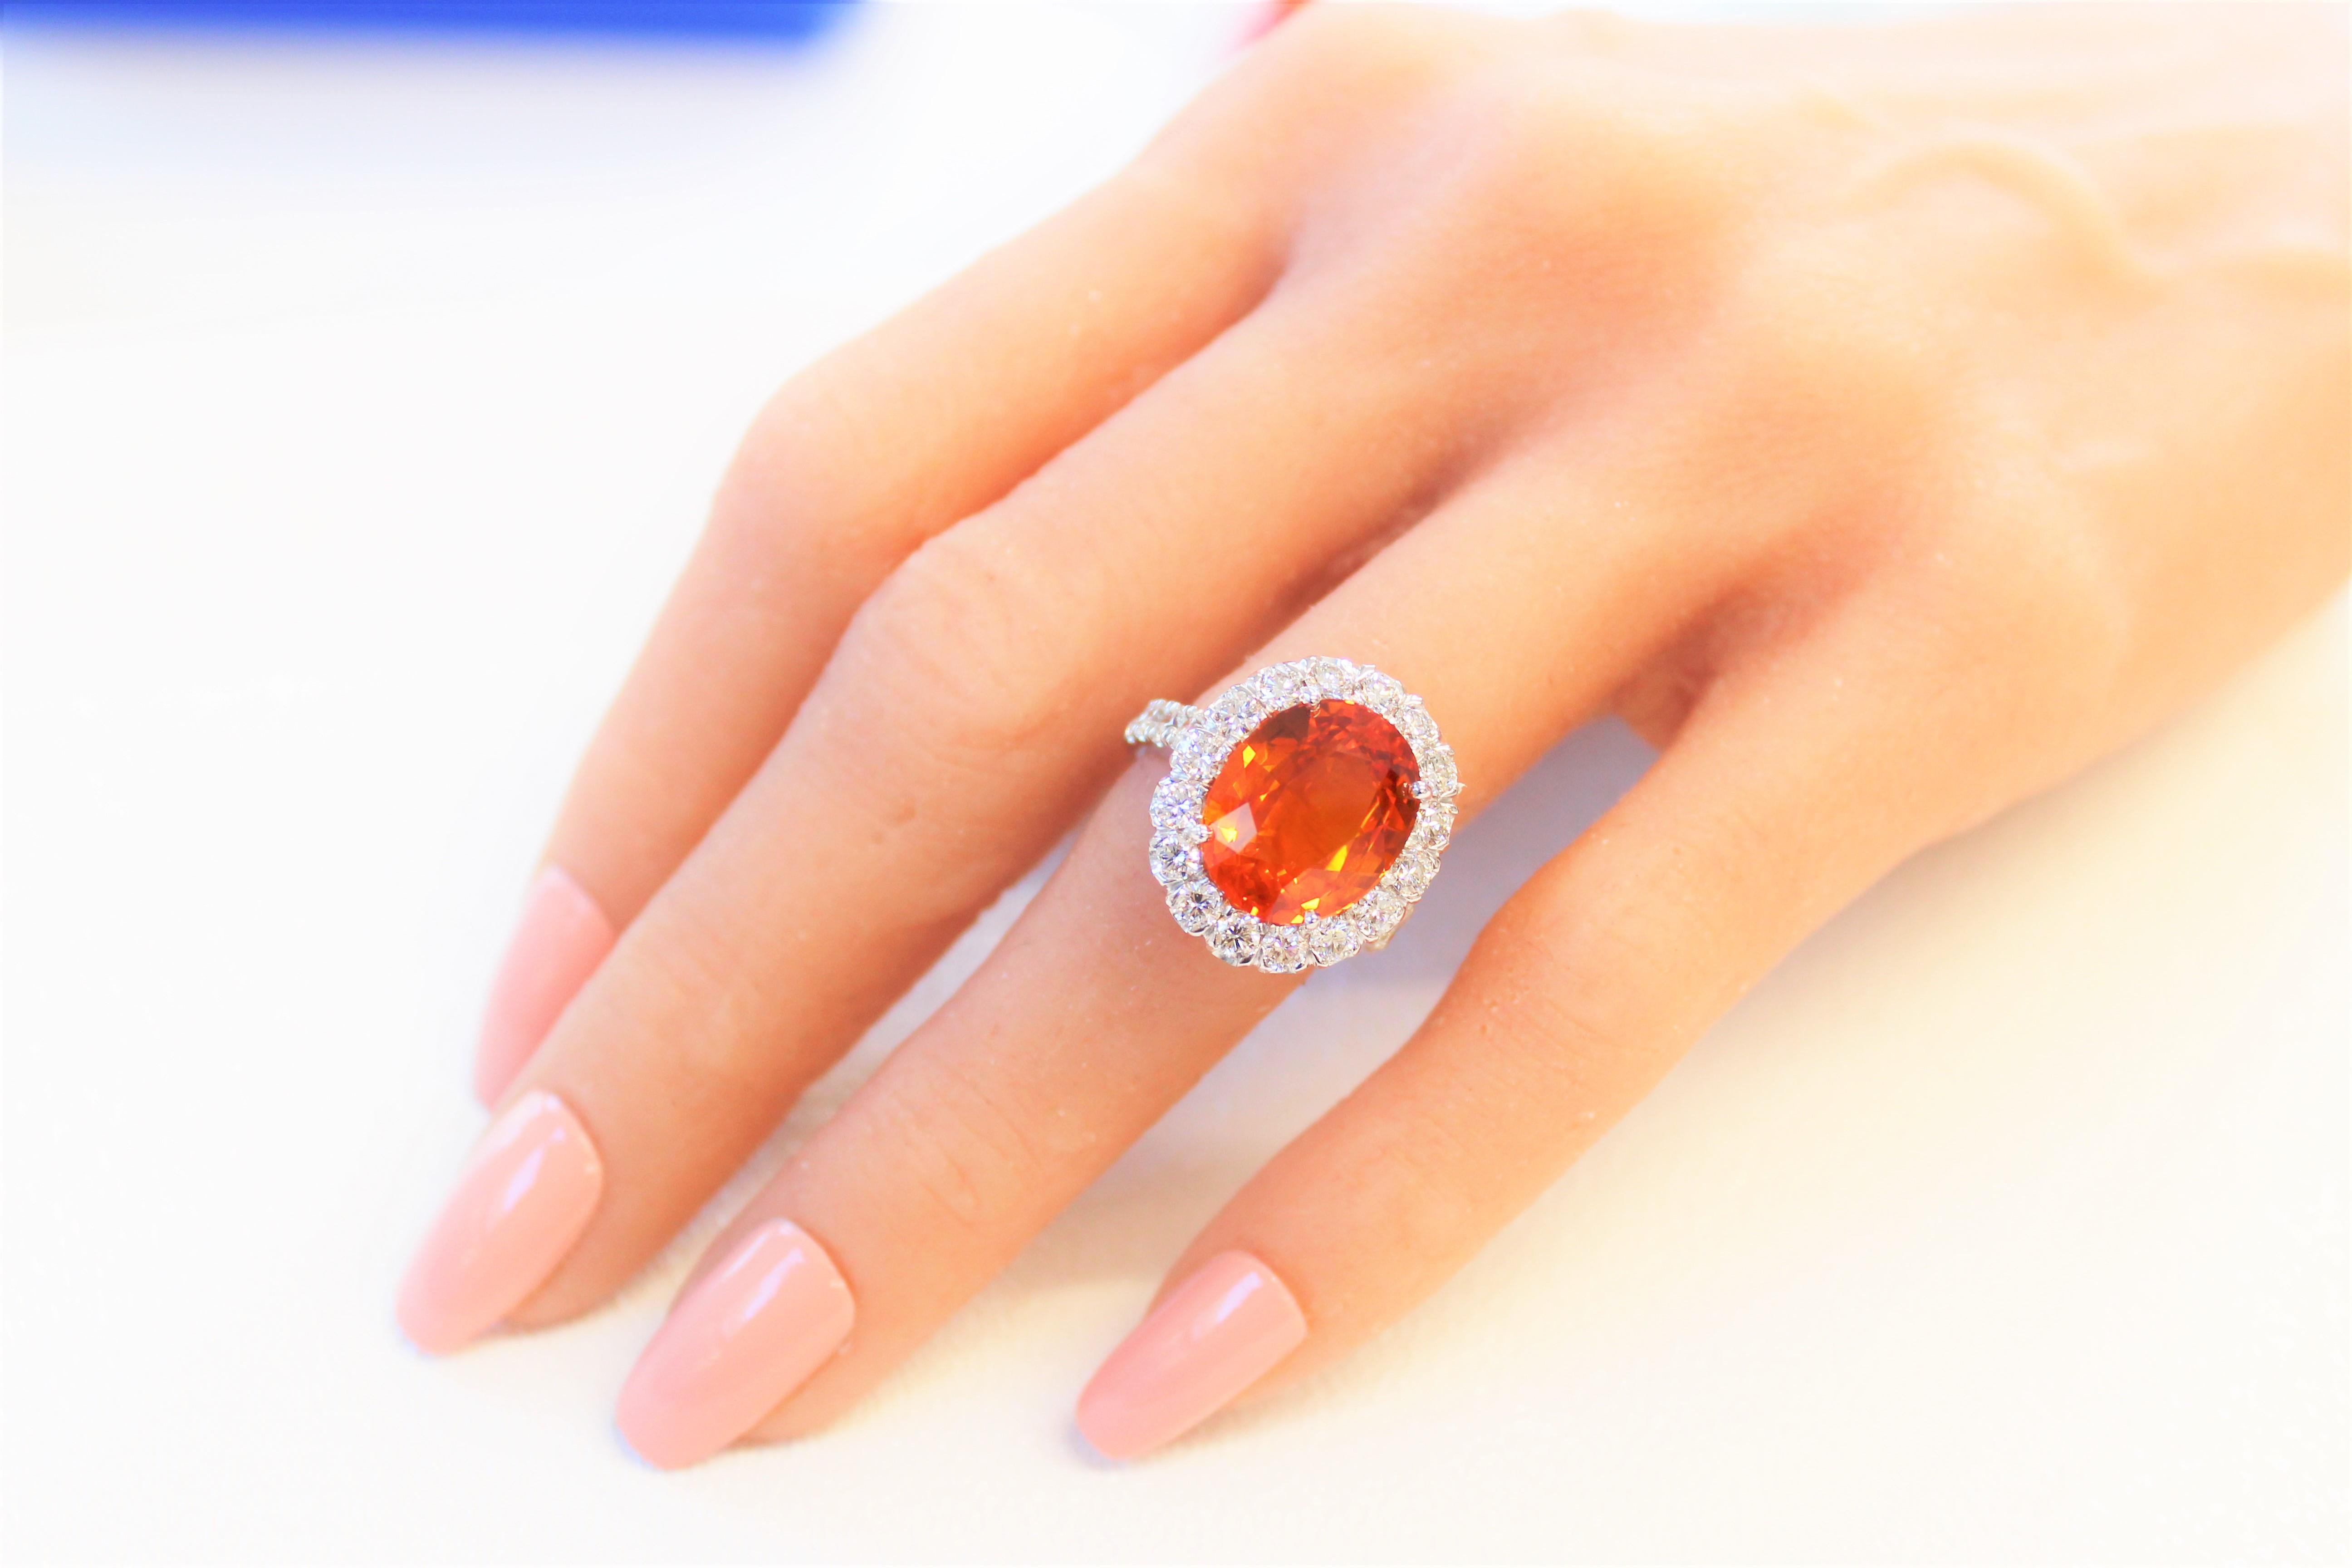 Cushion Cut 10.47 Carat Oval Orange Sapphire and Diamond Ring in 18K White Gold For Sale